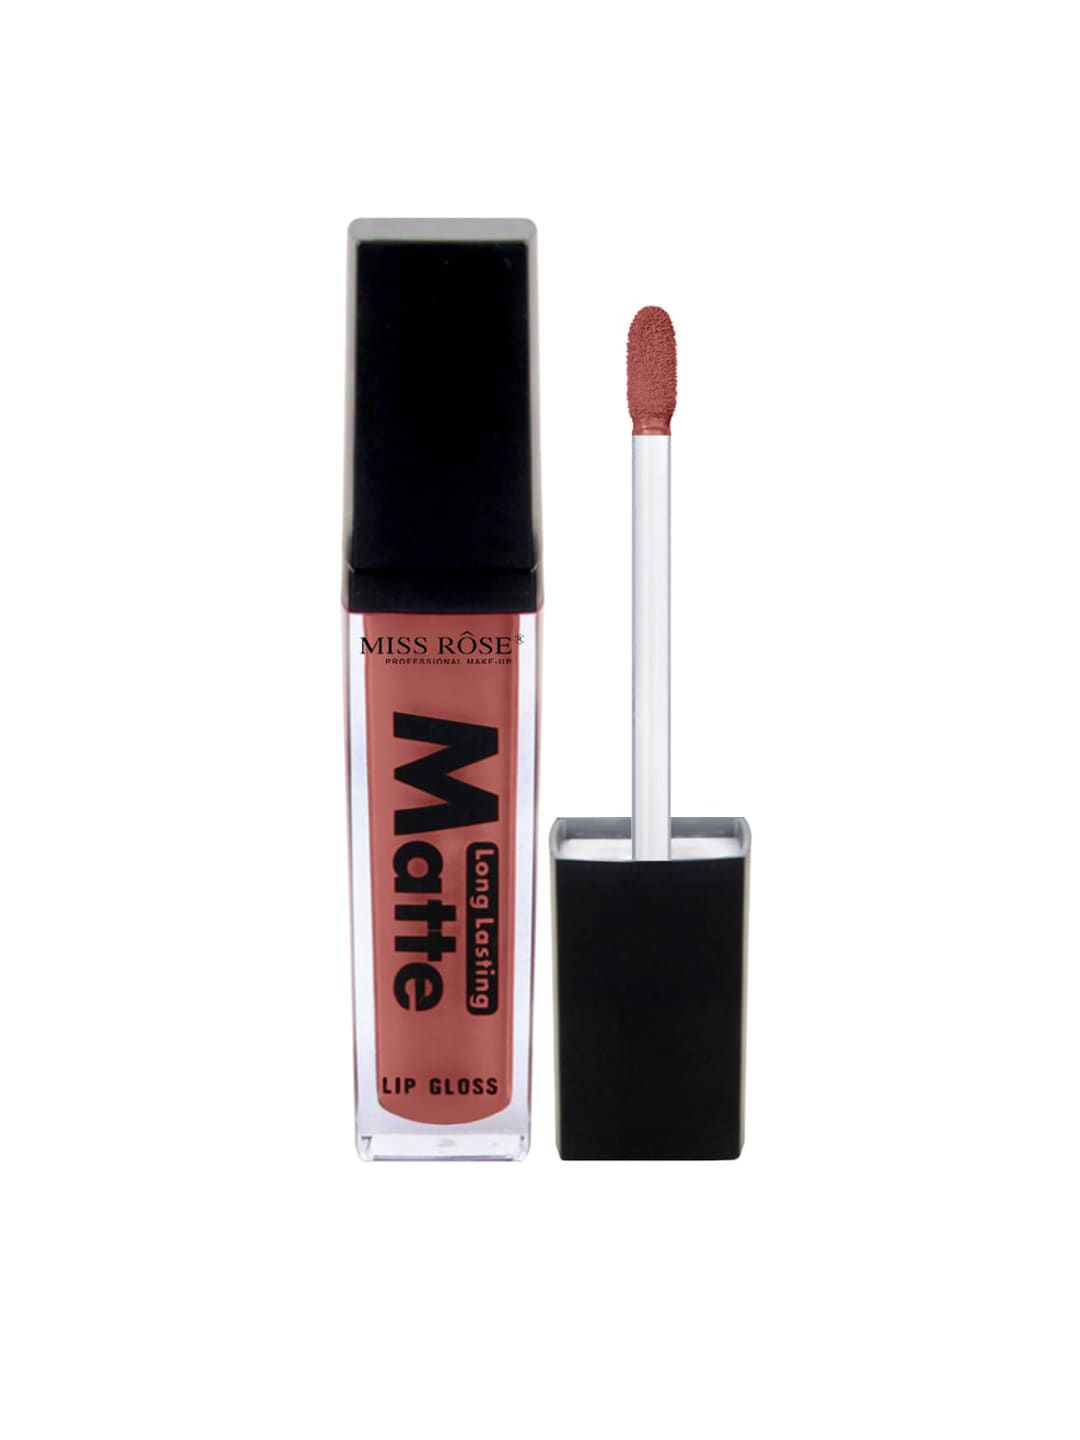 MISS ROSE Matte Long Lasting LipGloss 7701-002M 15 20 gm Price in India